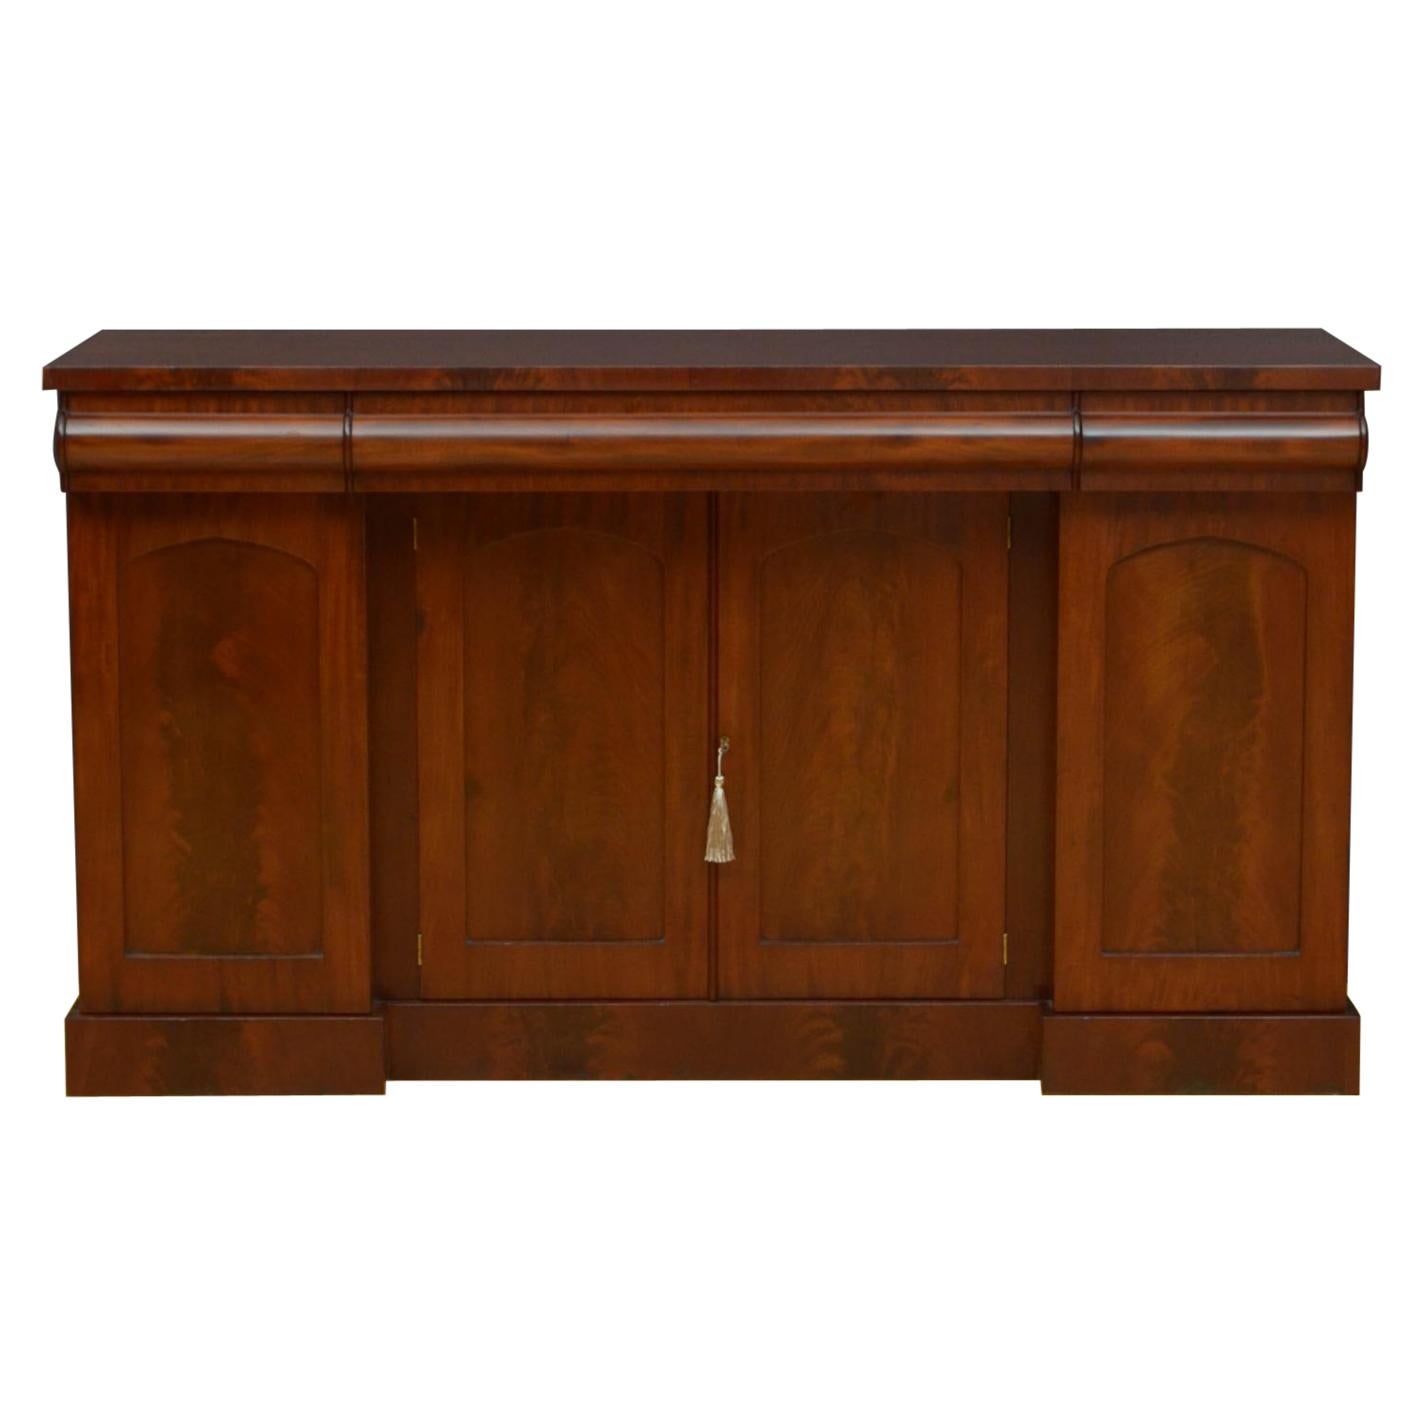 William IV / Early Victorian Sideboard in Mahogany